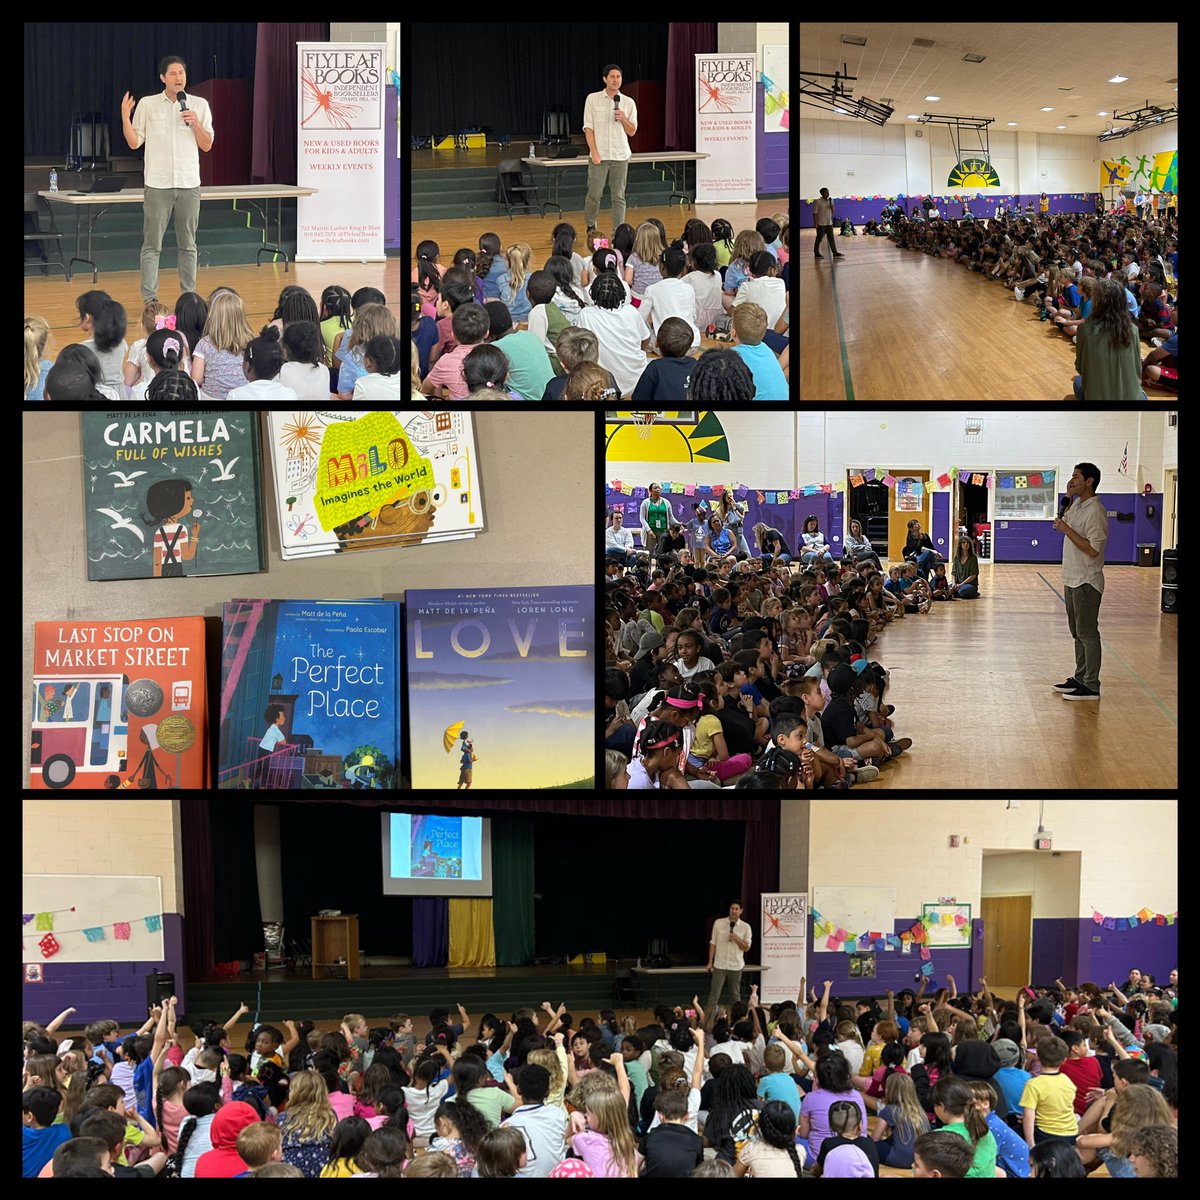 Can’t thank @FlyleafBooks and award-winning author @mattdelapena enough for coming to speak to our K-3 students today. He shared an inspiring message and read from his new book “The Perfect Place.” #EveryKidEveryDay #NHVoyagers #RepresentationMatters